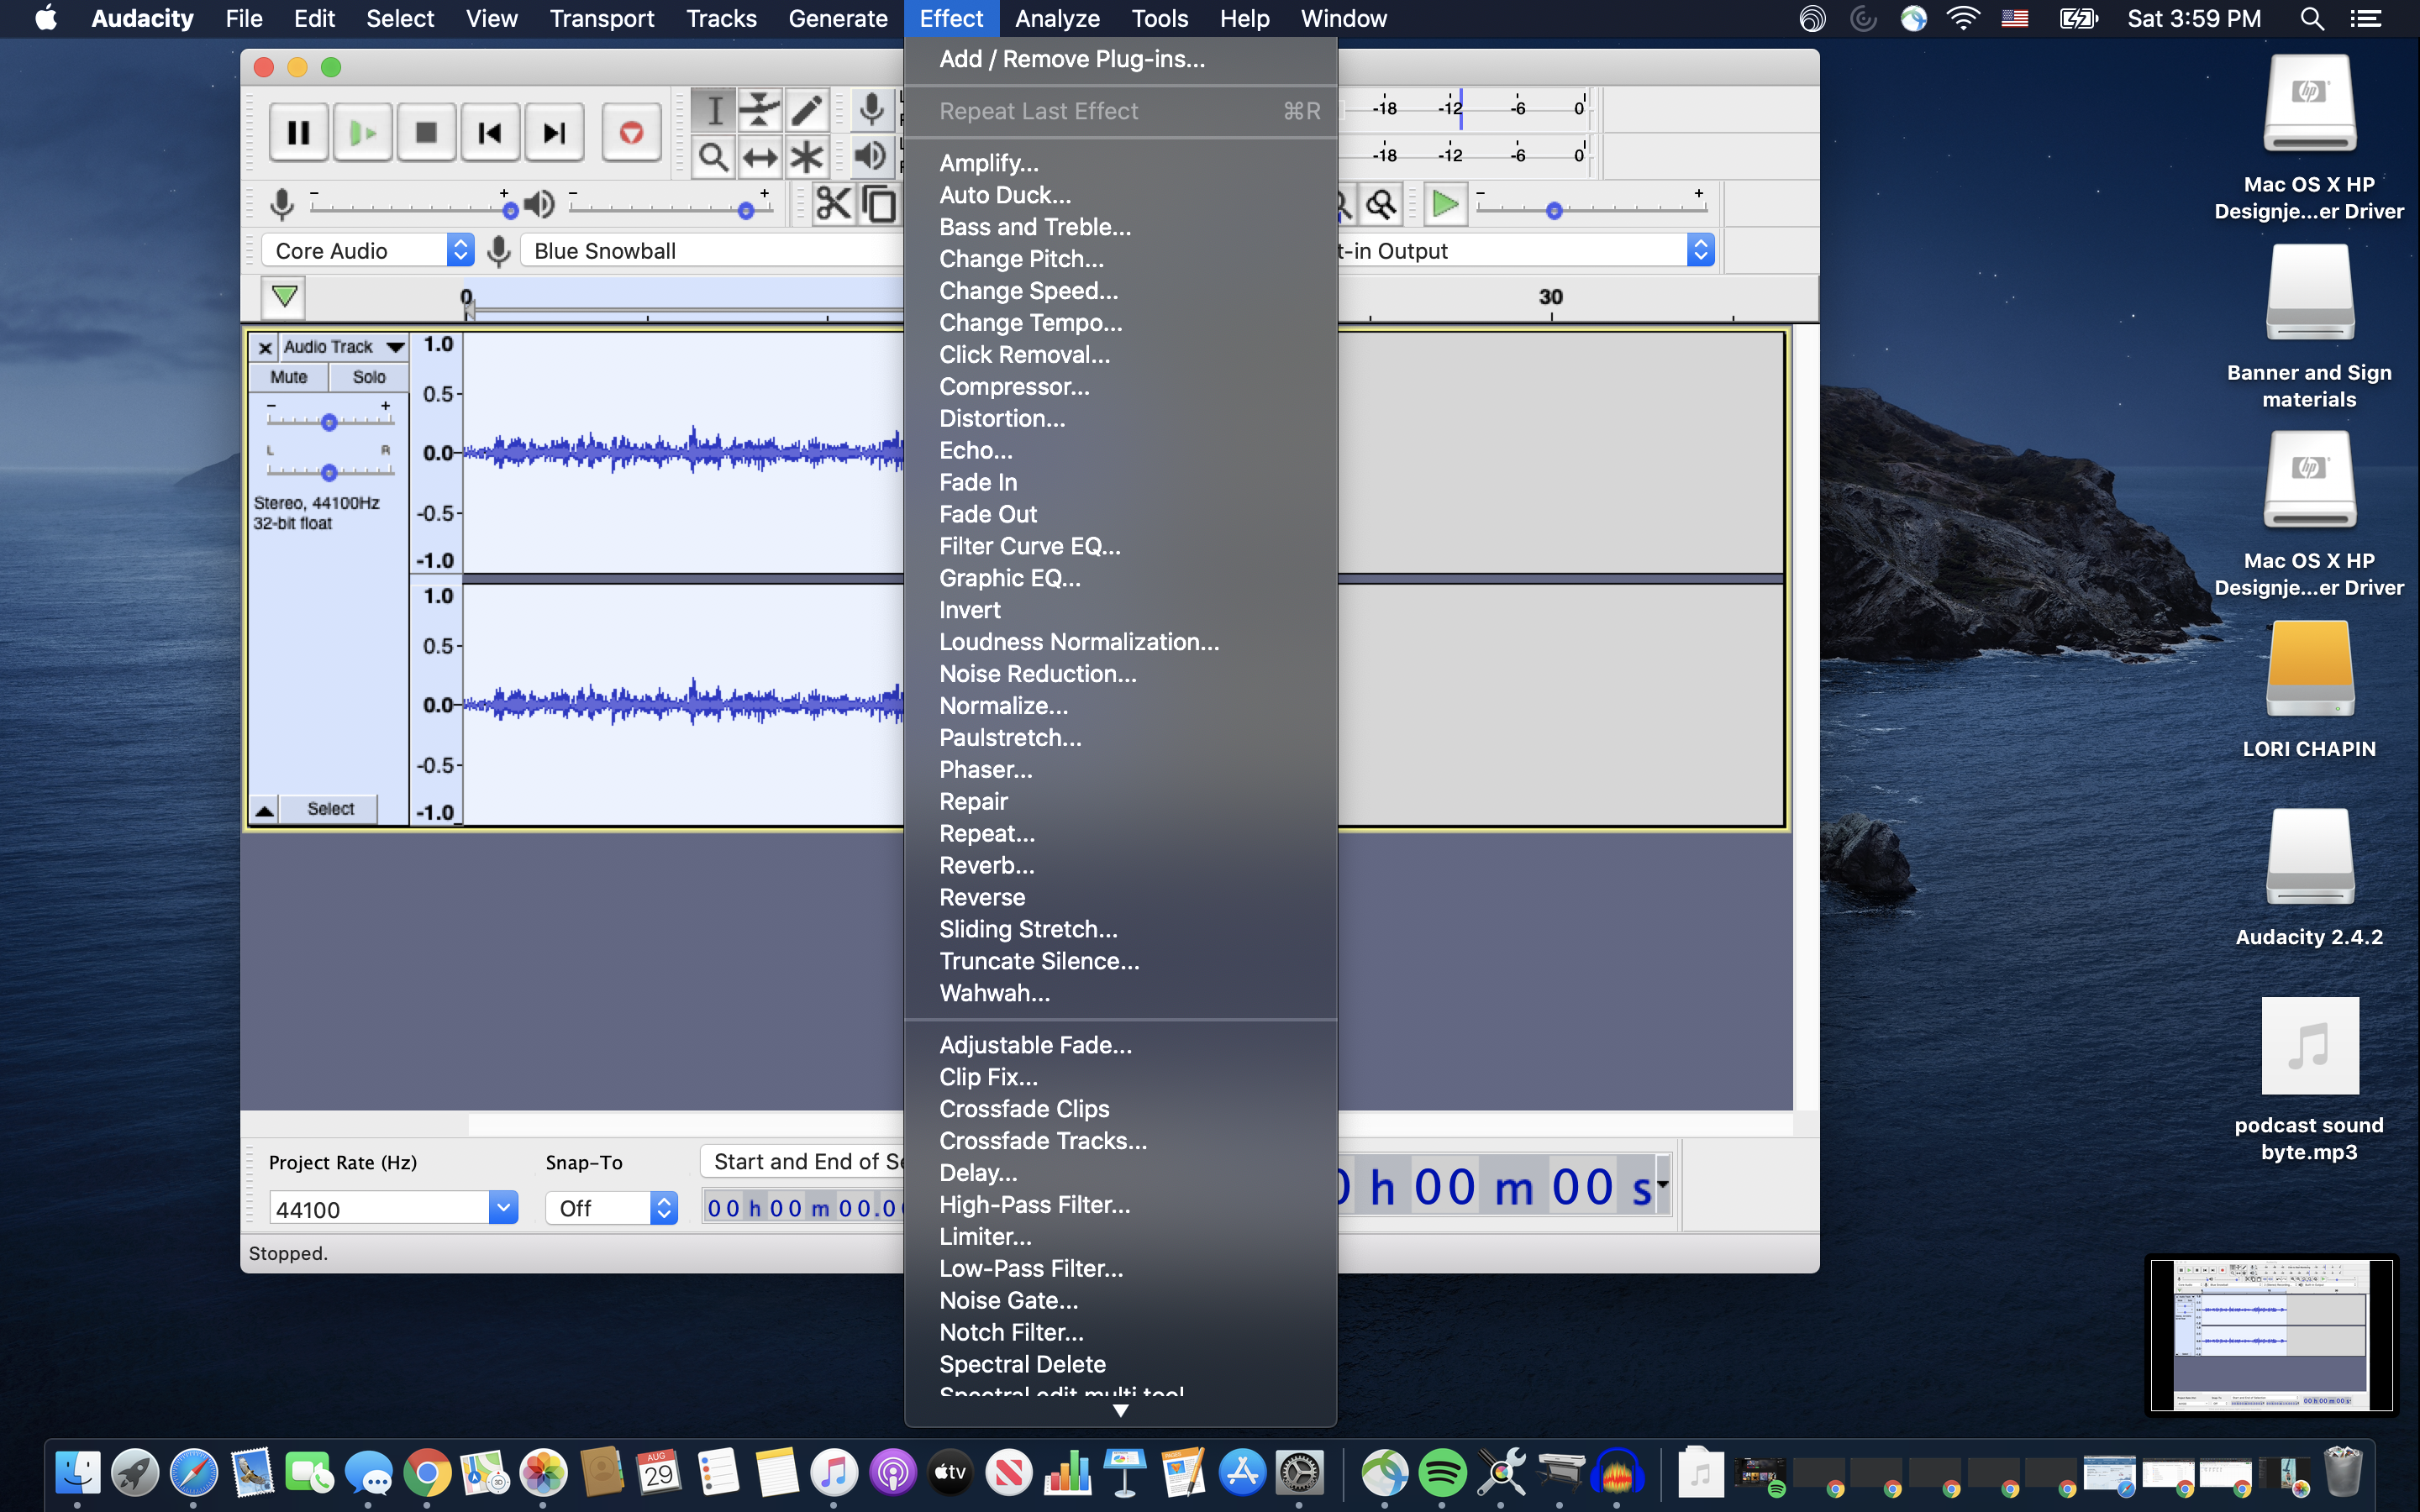 Audacity window with Effects selected from the top of screen toolbar